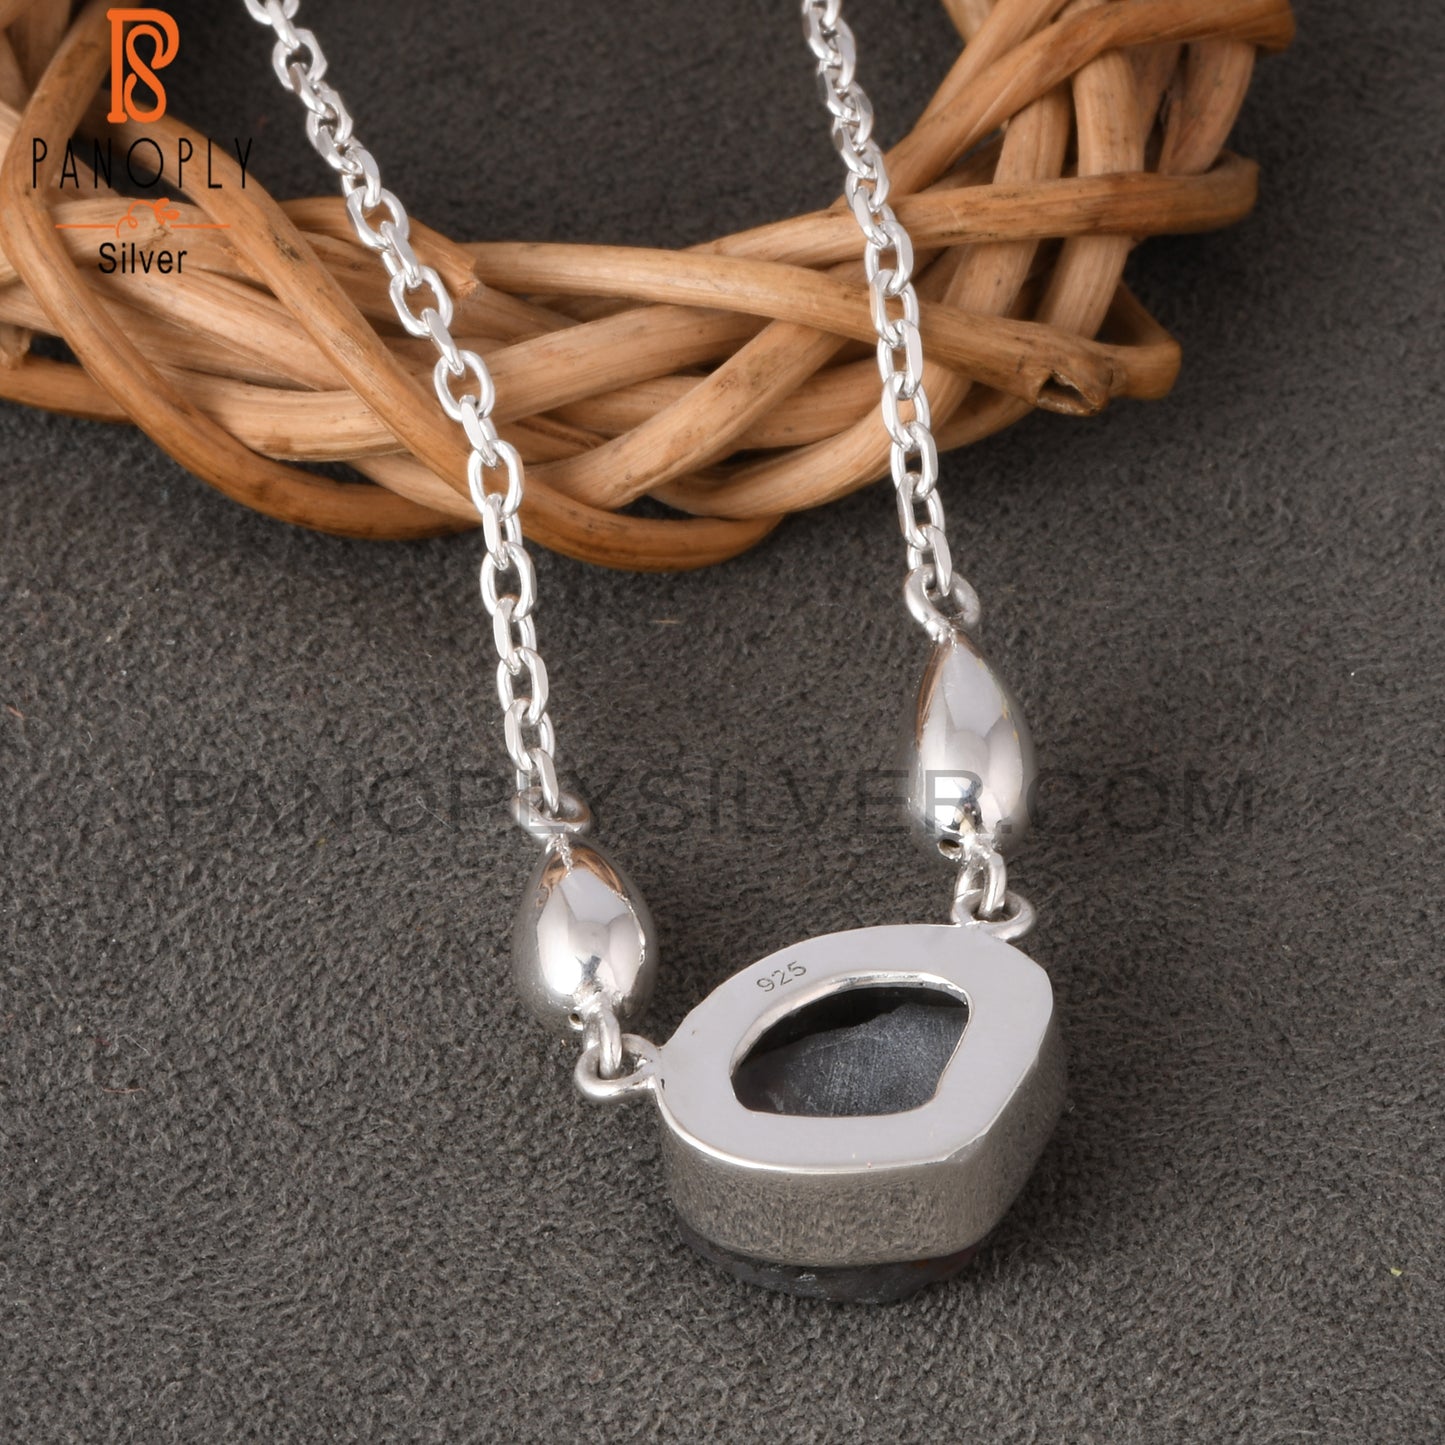 Super Seven Rough 925 Sterling Silver Pendant With Chain